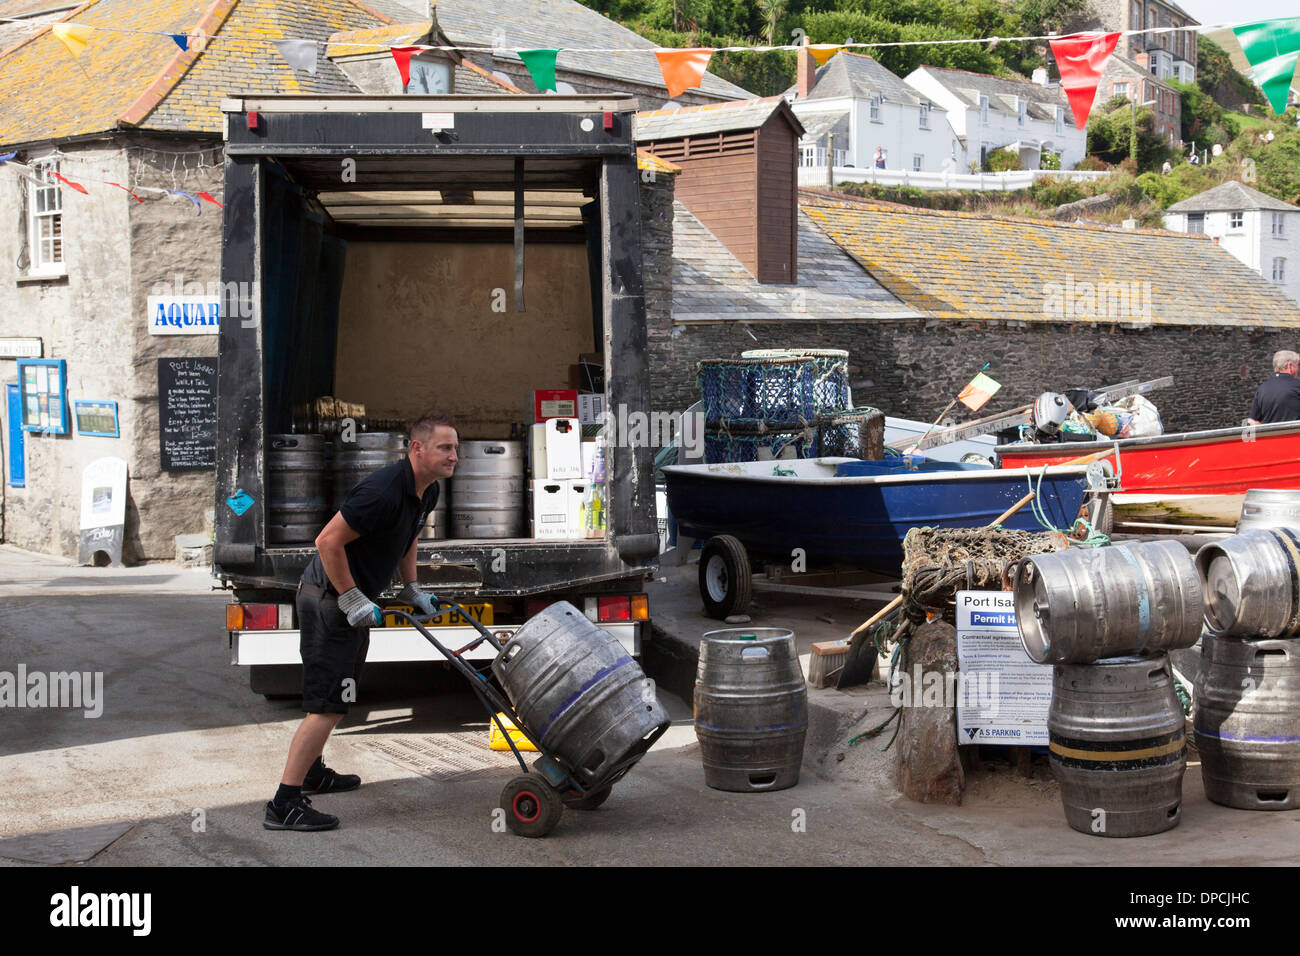 A brewery drayman delivering beer kegs to a public house in Cornwall, U.K. Stock Photo